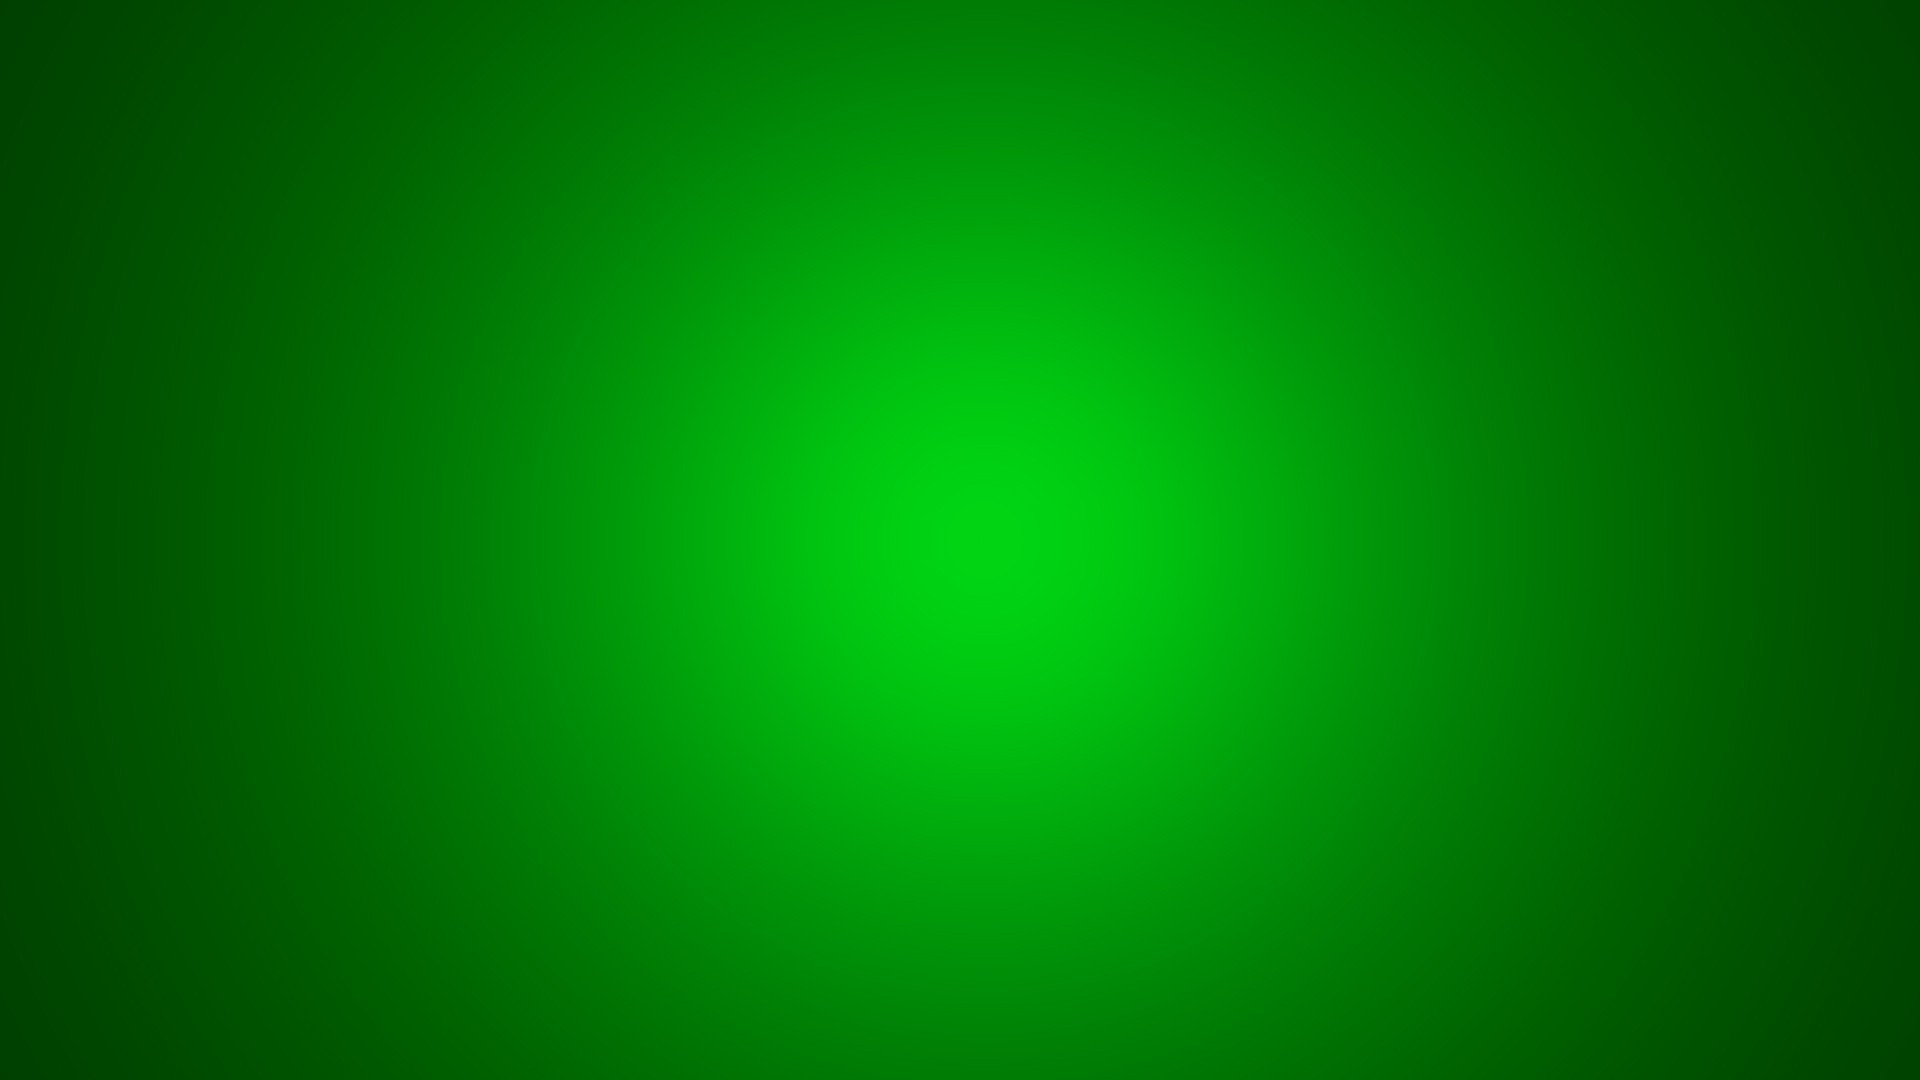 1920x1080 Neon Green Backgrounds - Wallpaper Cave Solid Lime Green - wallpaper.